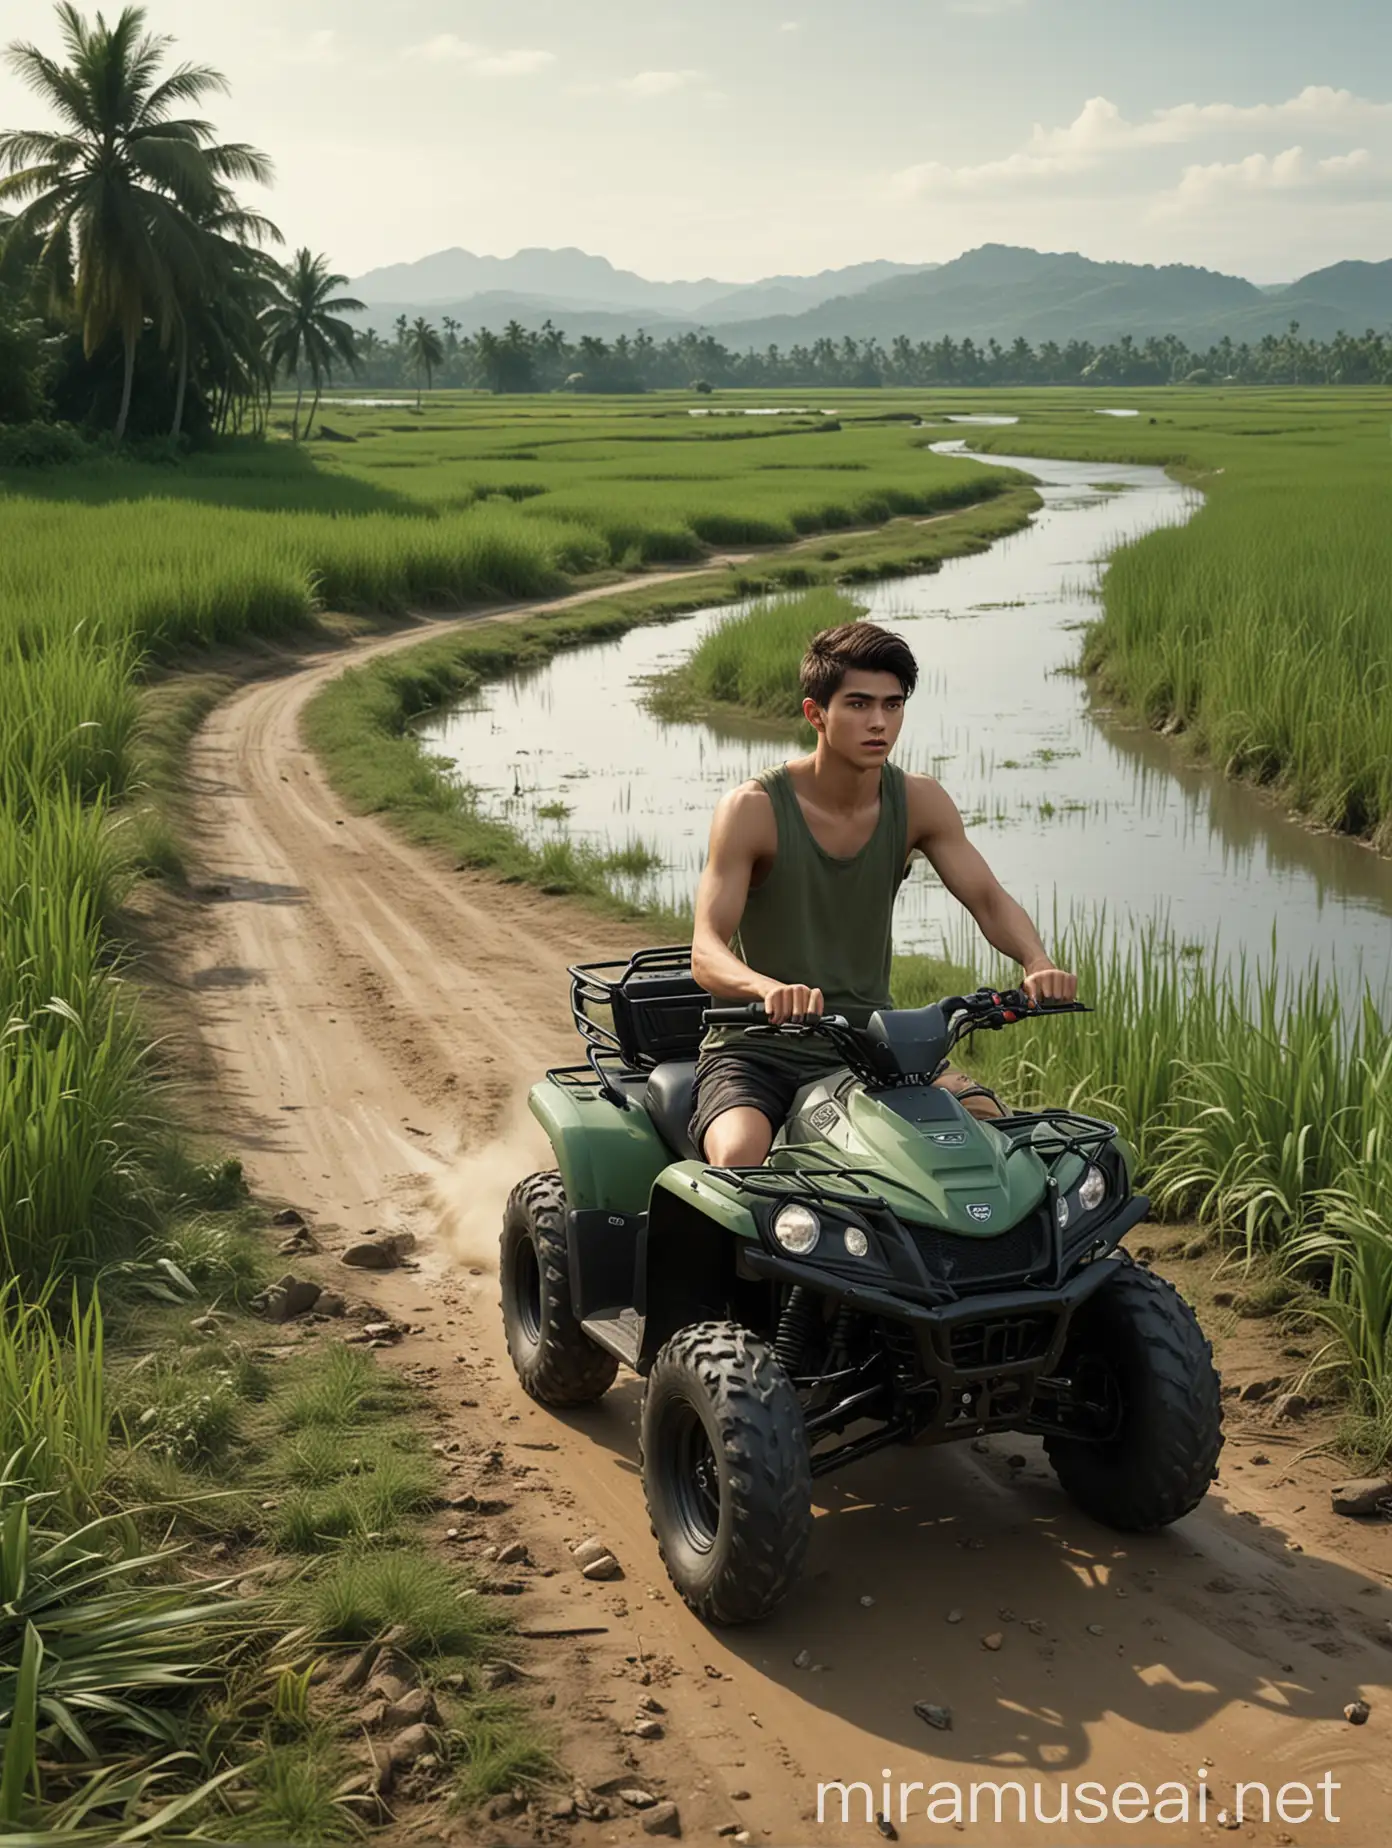 Adventurous Teen on ATV Sage Green Tank Top Black Shorts River and Paddy Fields Background